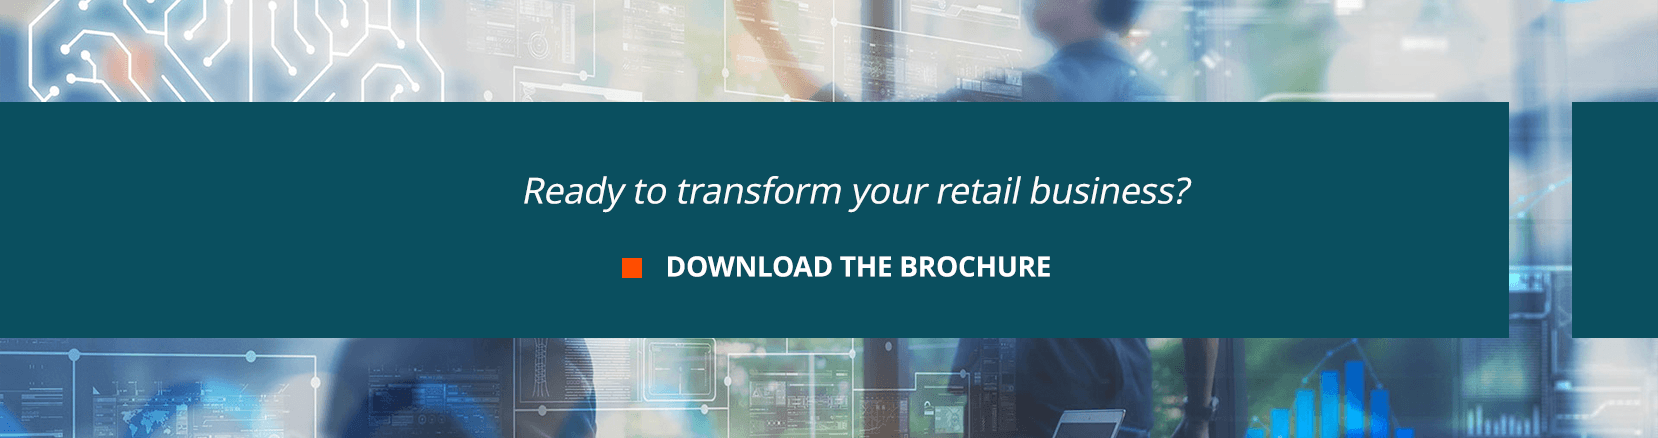 Ready to transform your retail business?